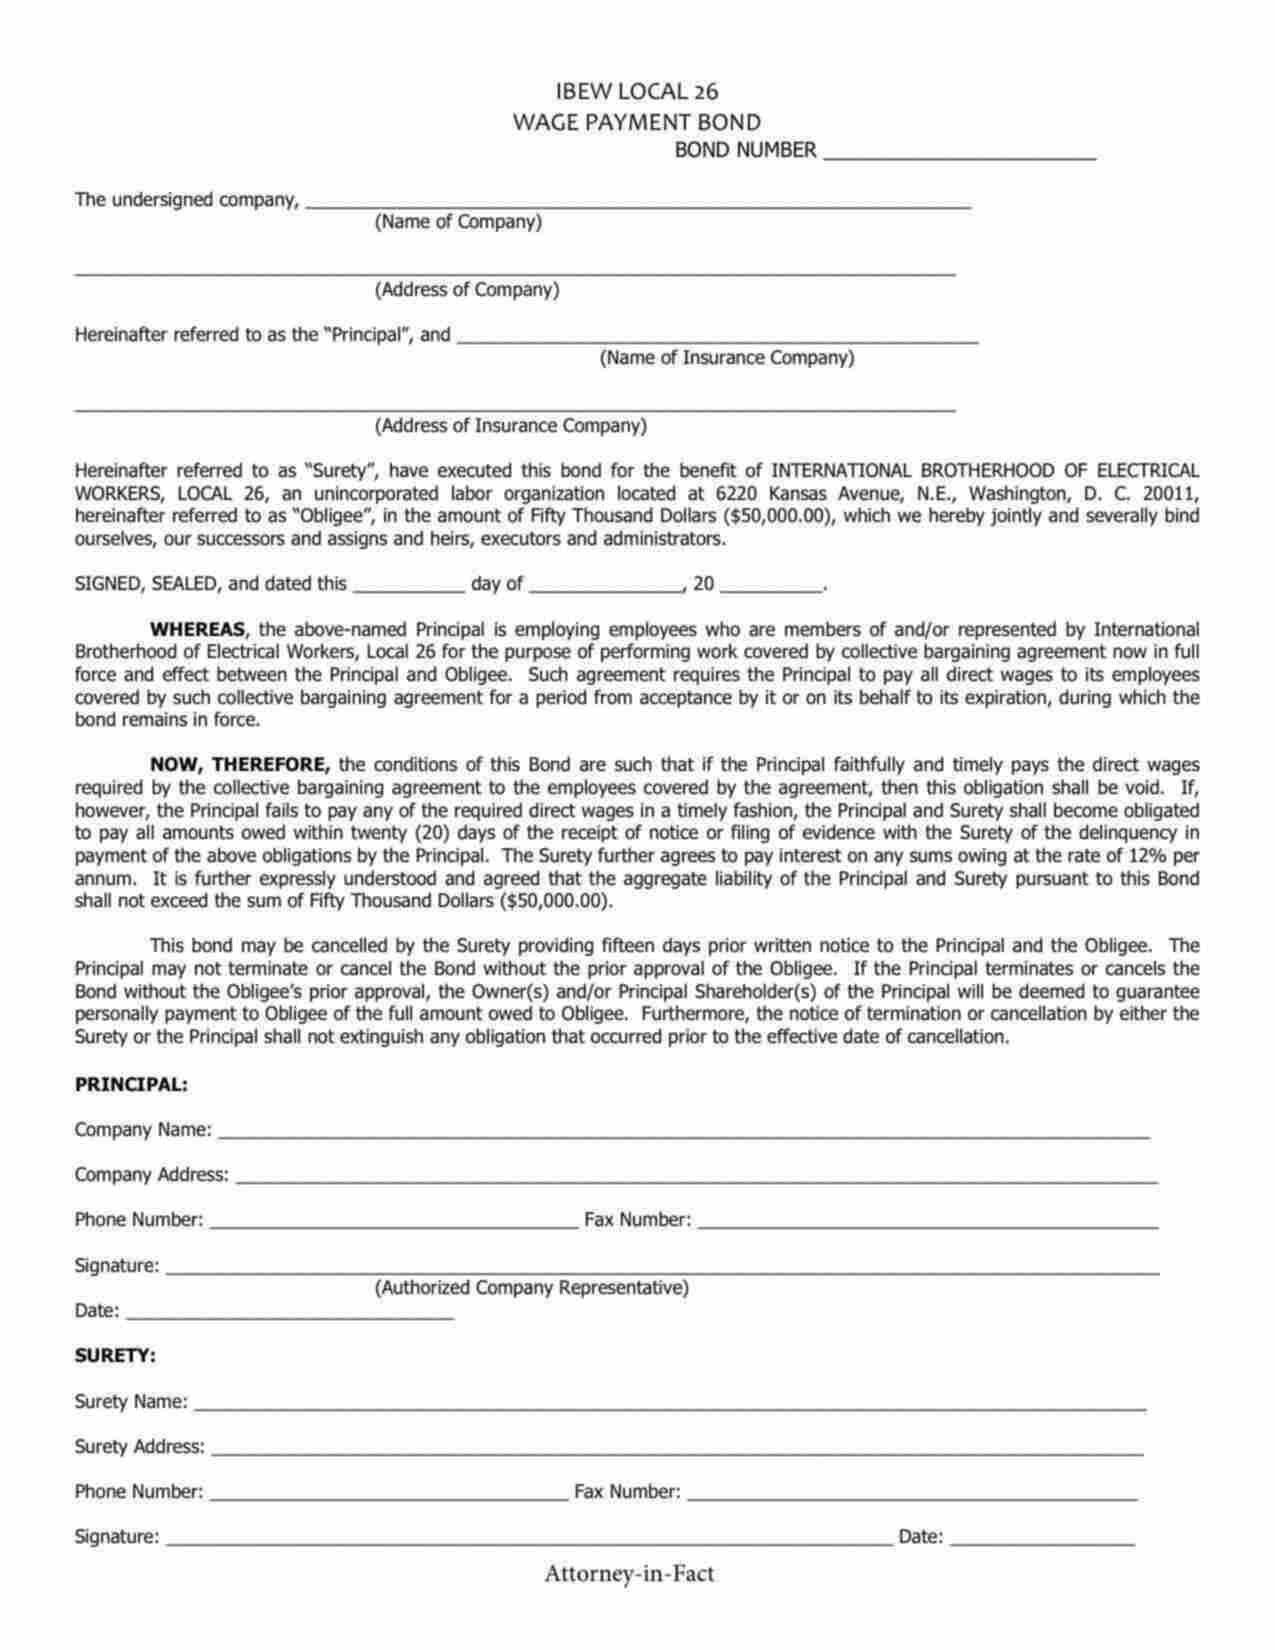 District of Columbia Wage Payment Bond Form